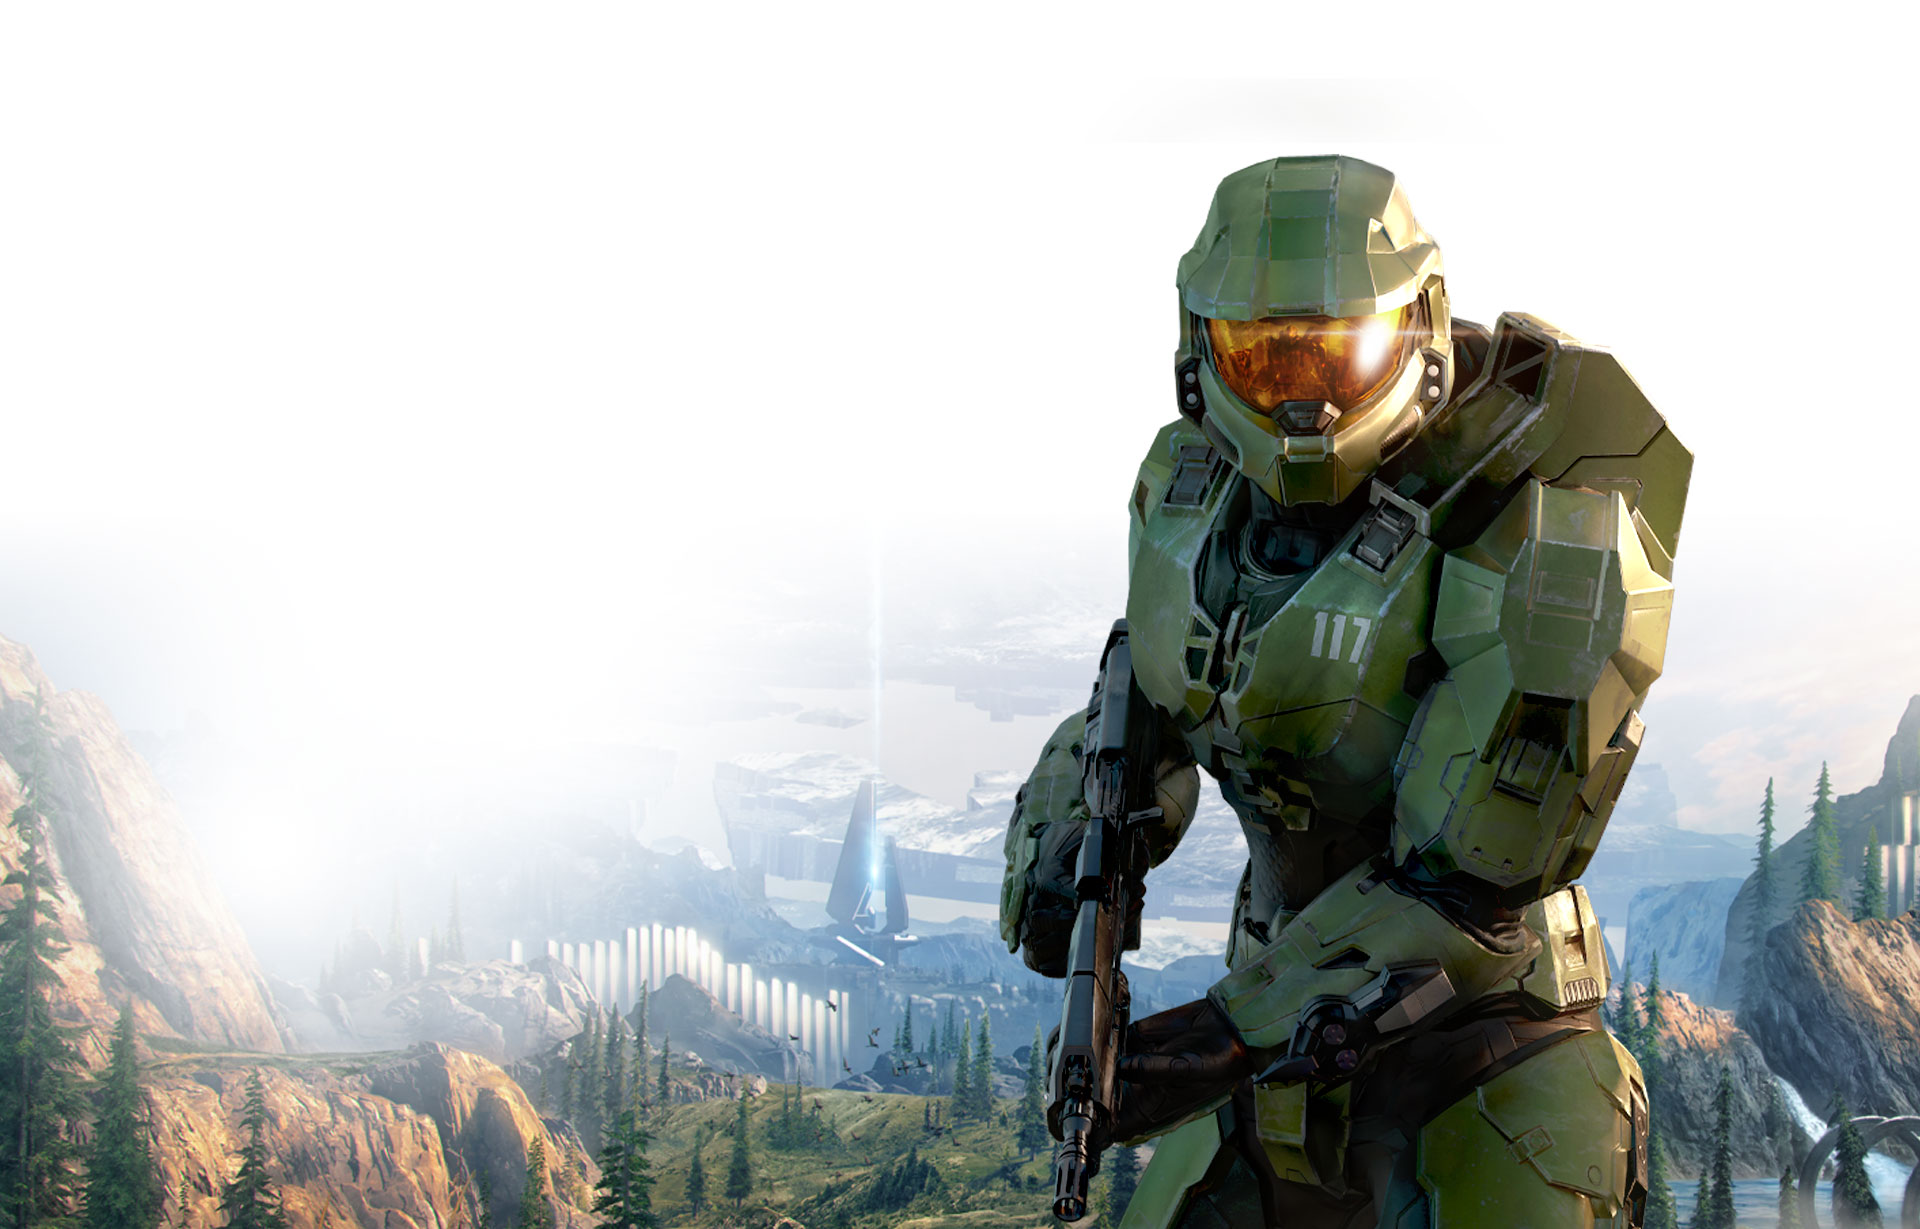 Master Chief with Halo in the background